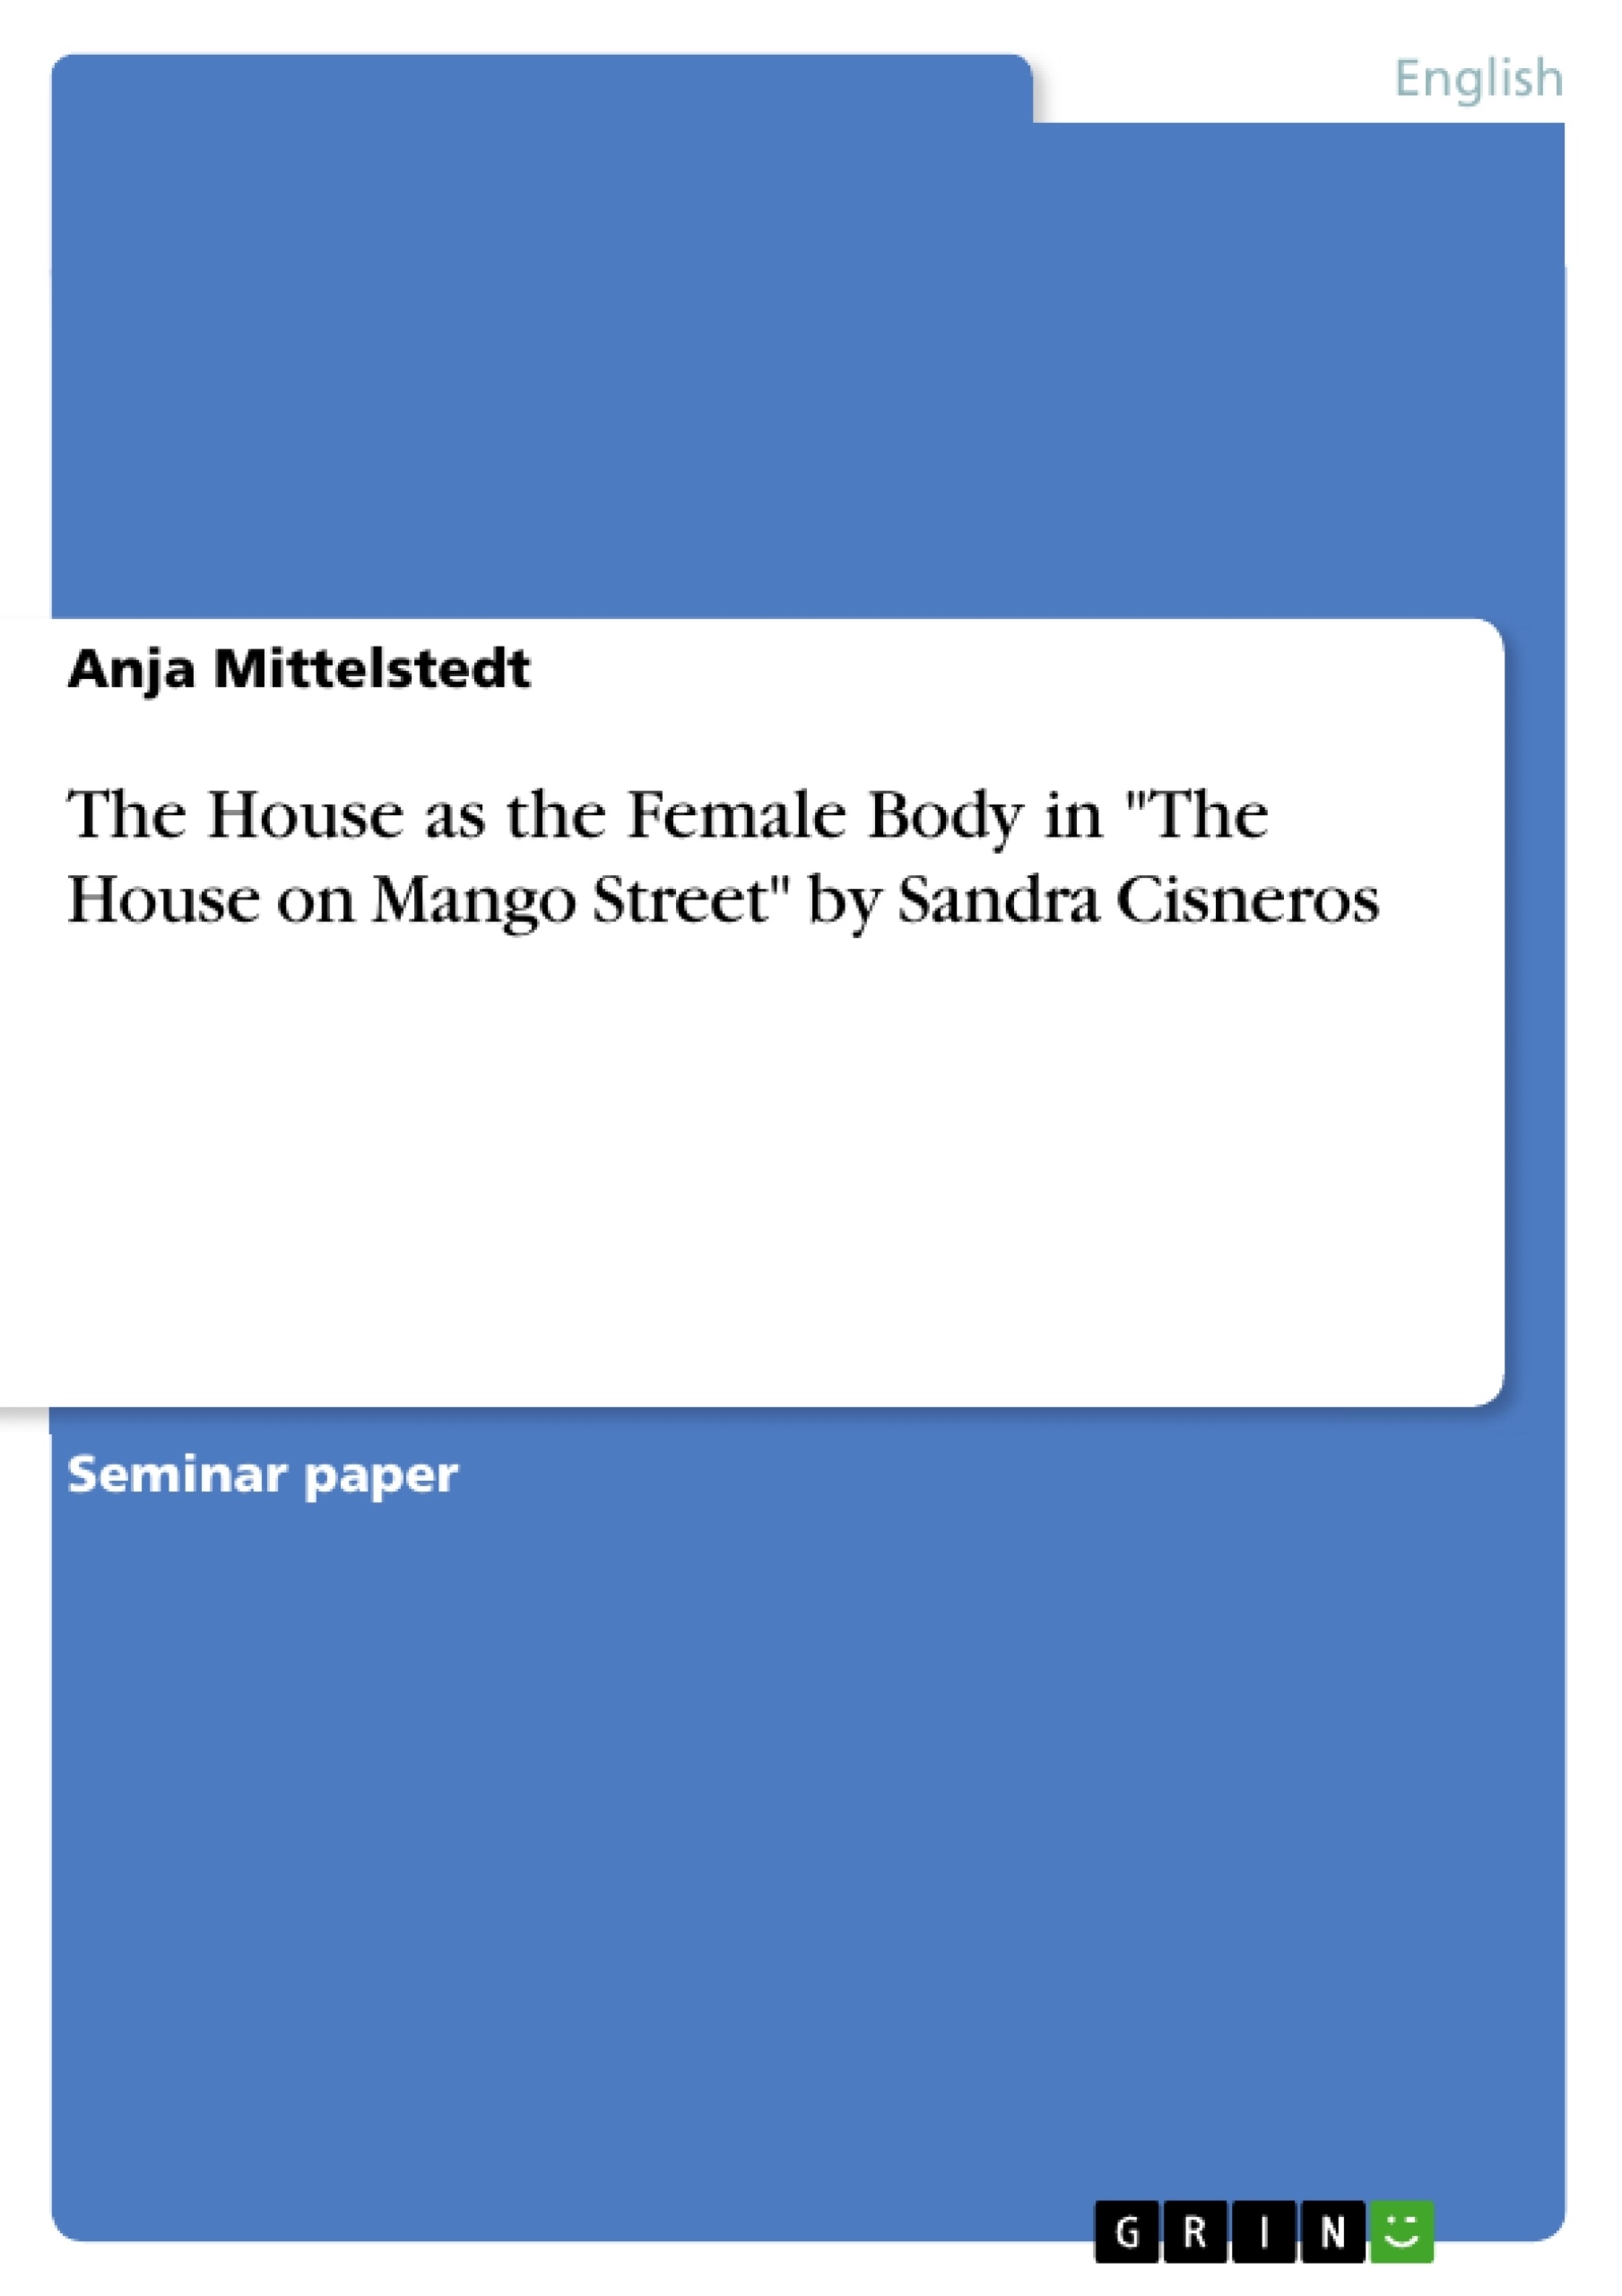 Título: The House as the Female Body in "The House on Mango Street" by Sandra Cisneros